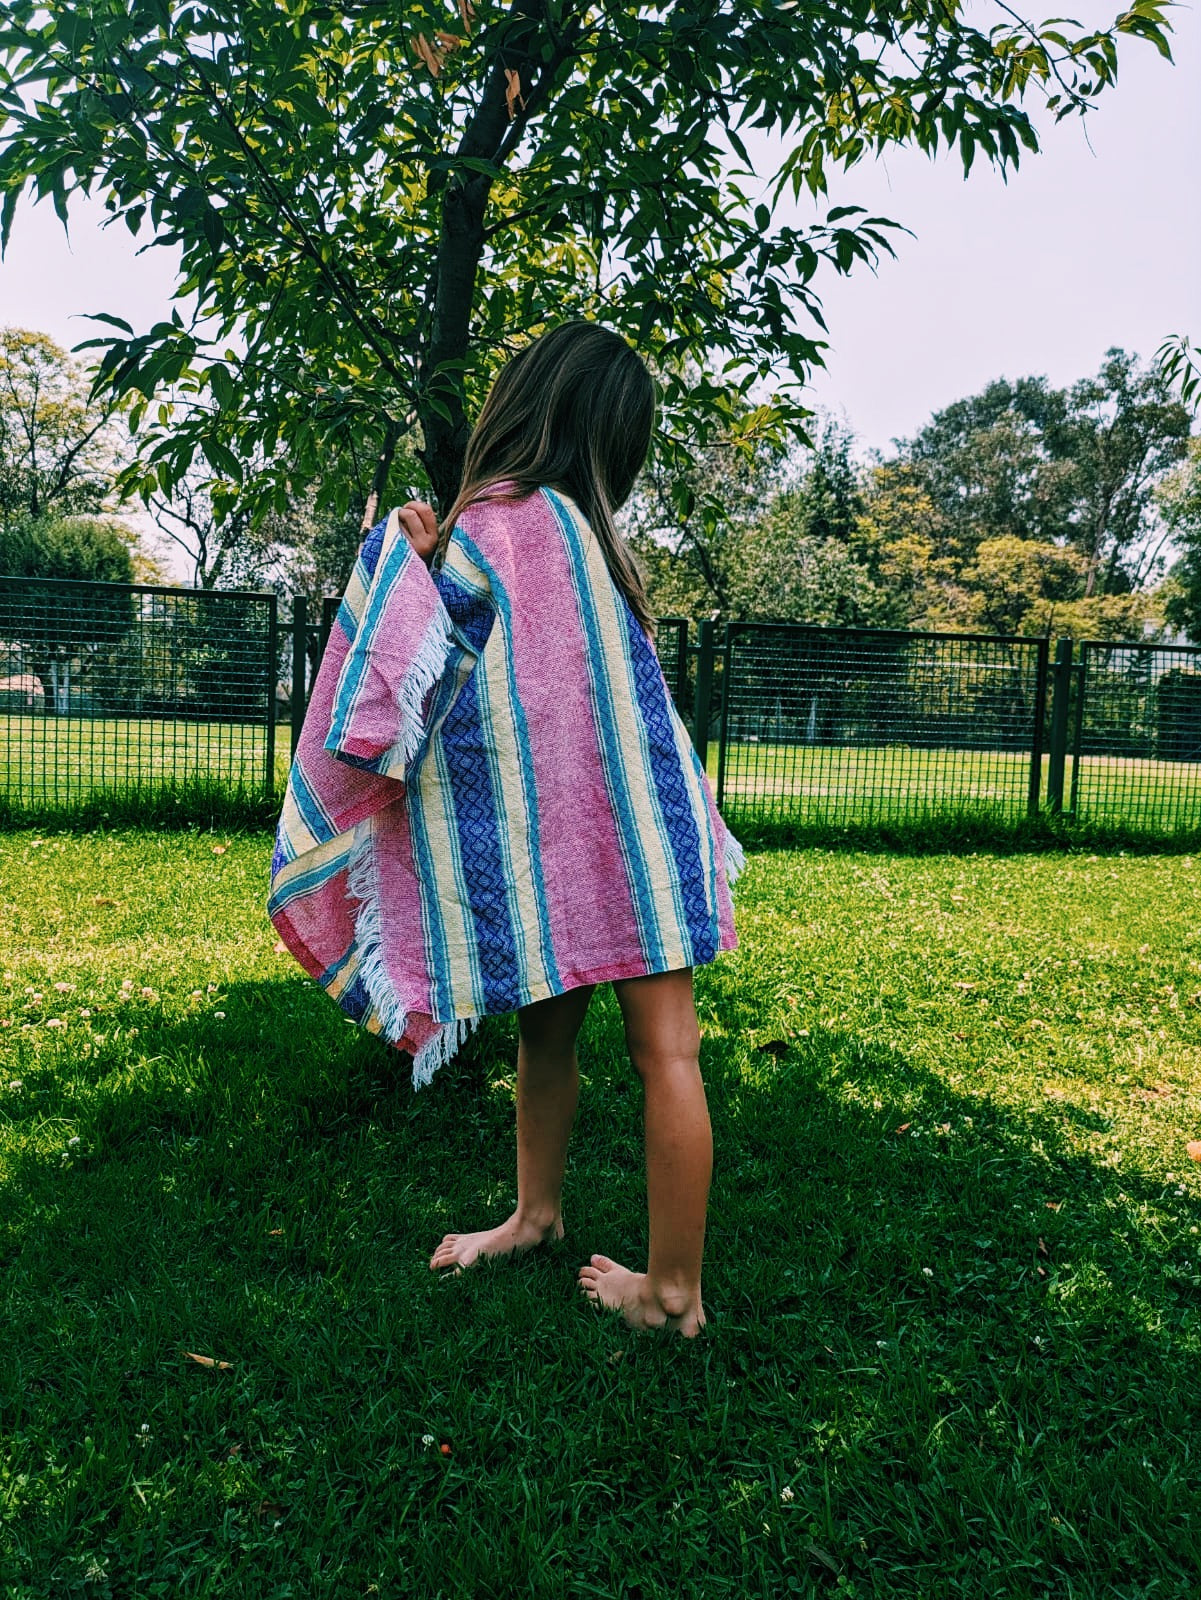 Mexican Kids Towel Dress for the Pool